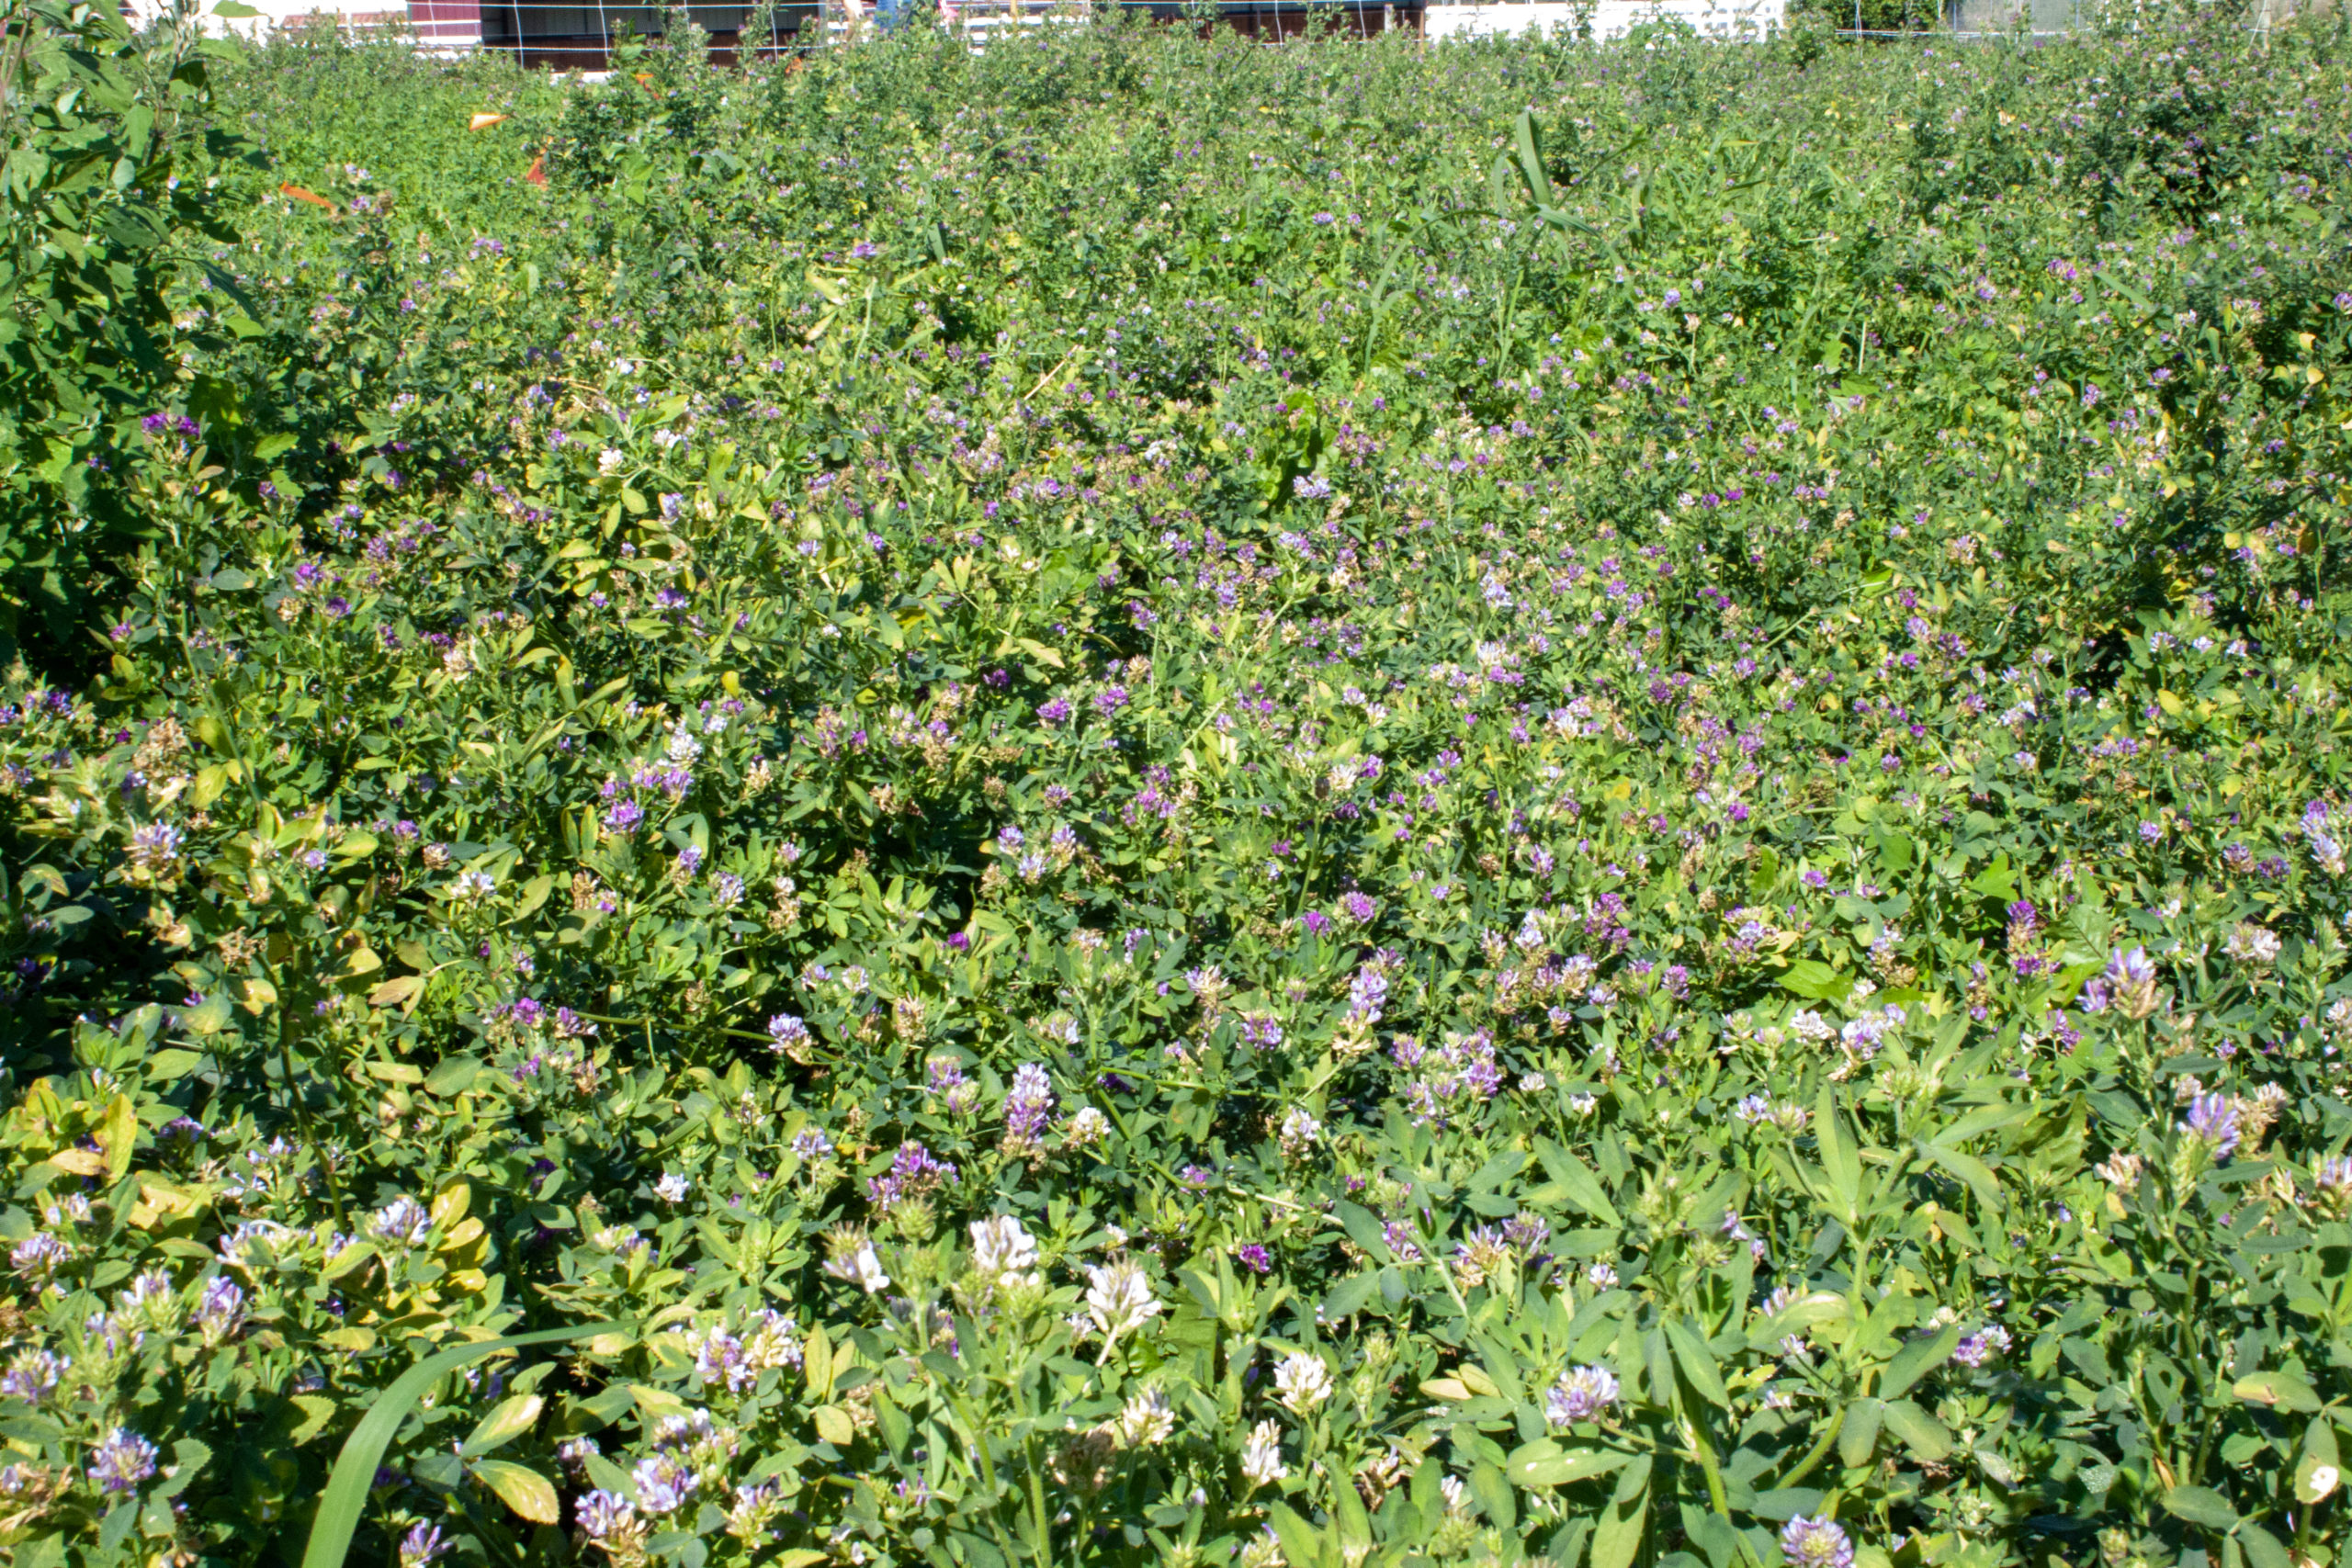 Green and healthy alfalfa plants growing in the field